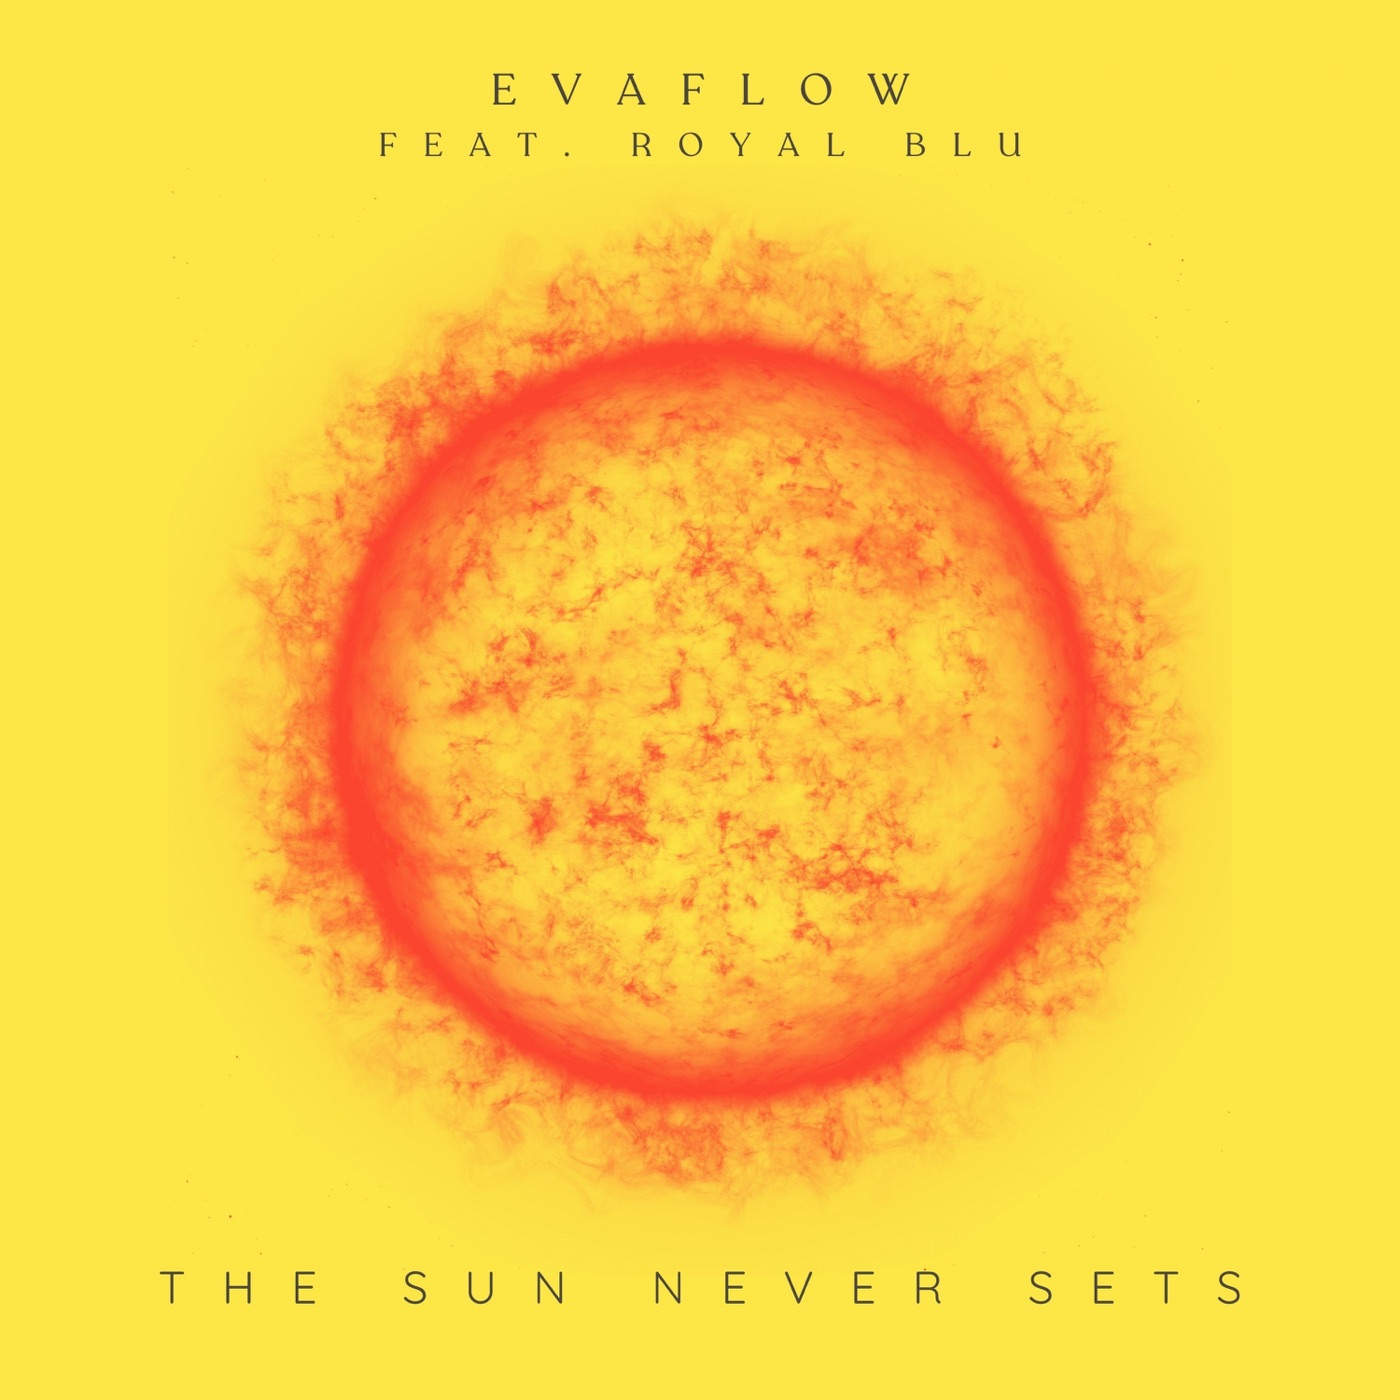 The Sun Never Sets by Evaflow